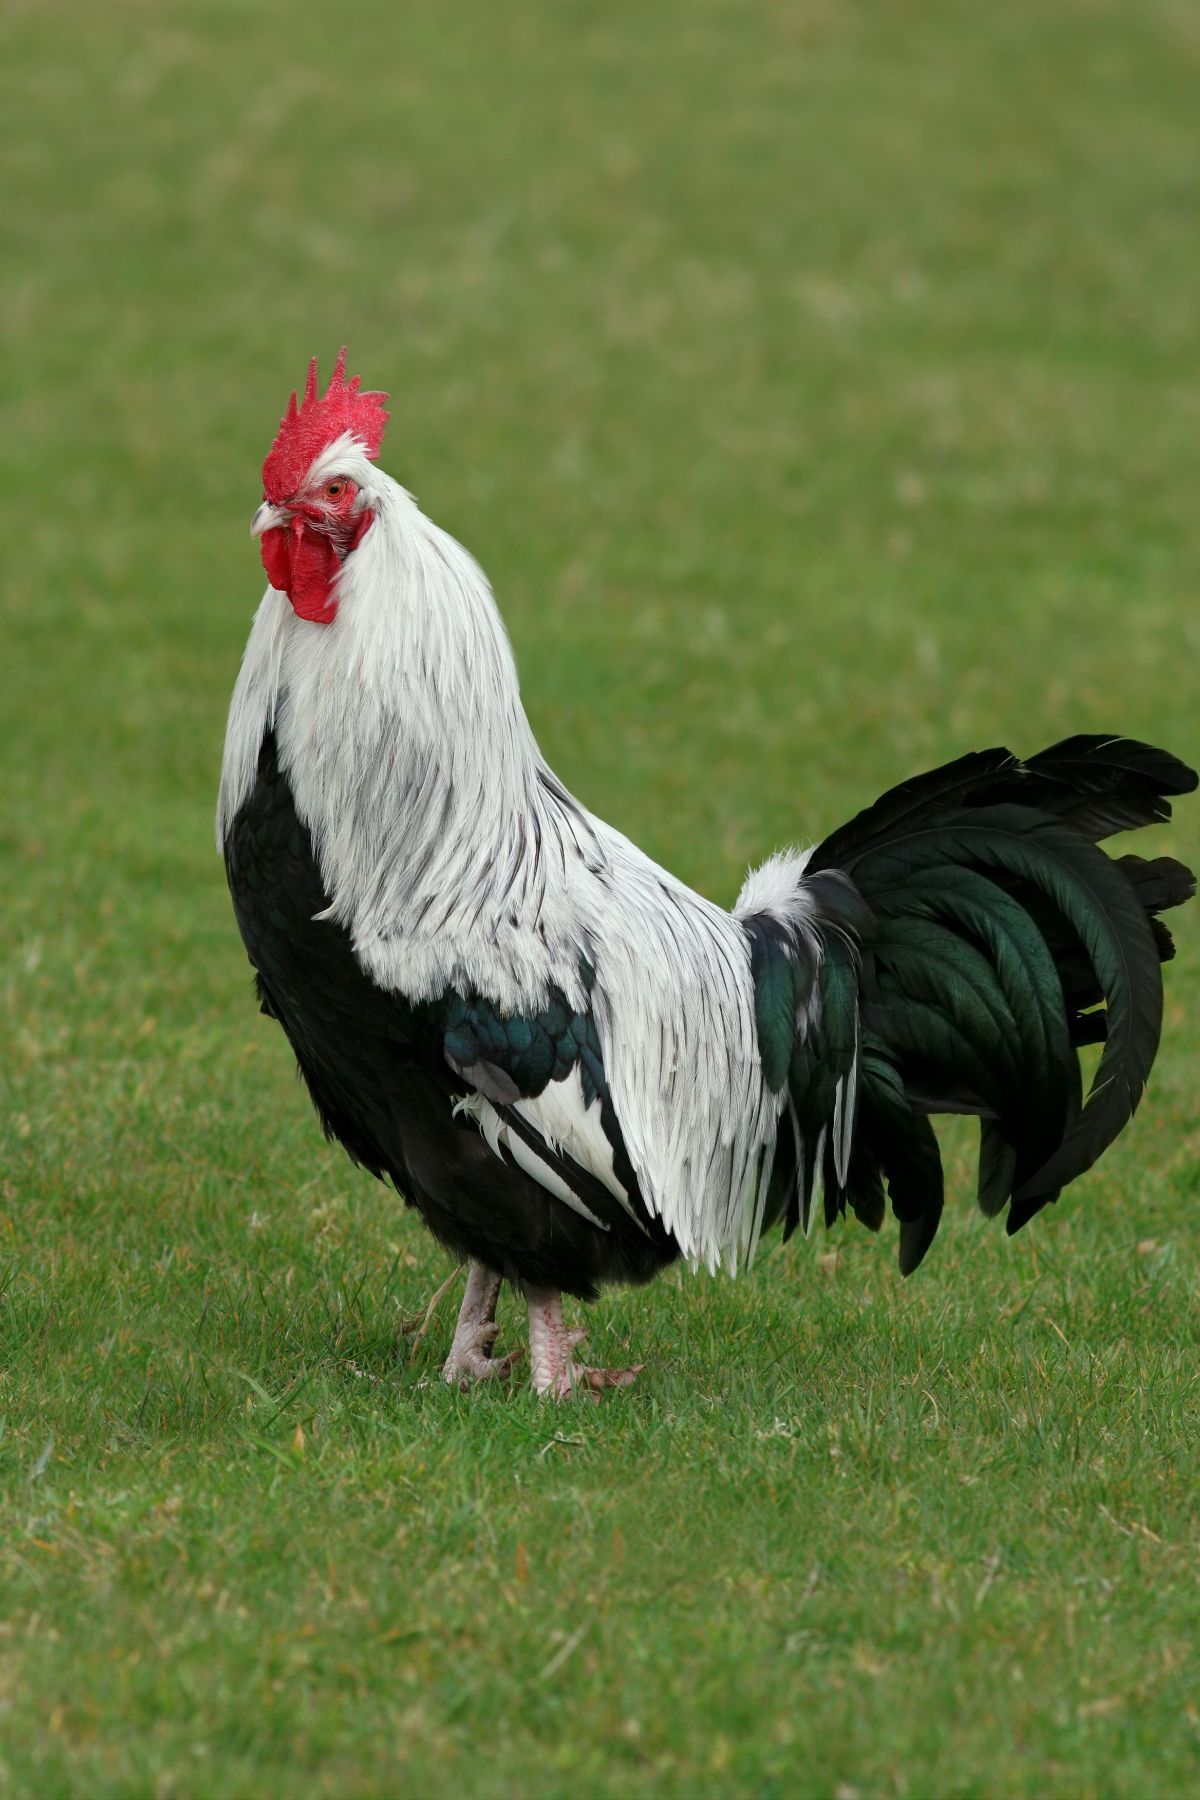 A big tall Dorking rooster on green grass.